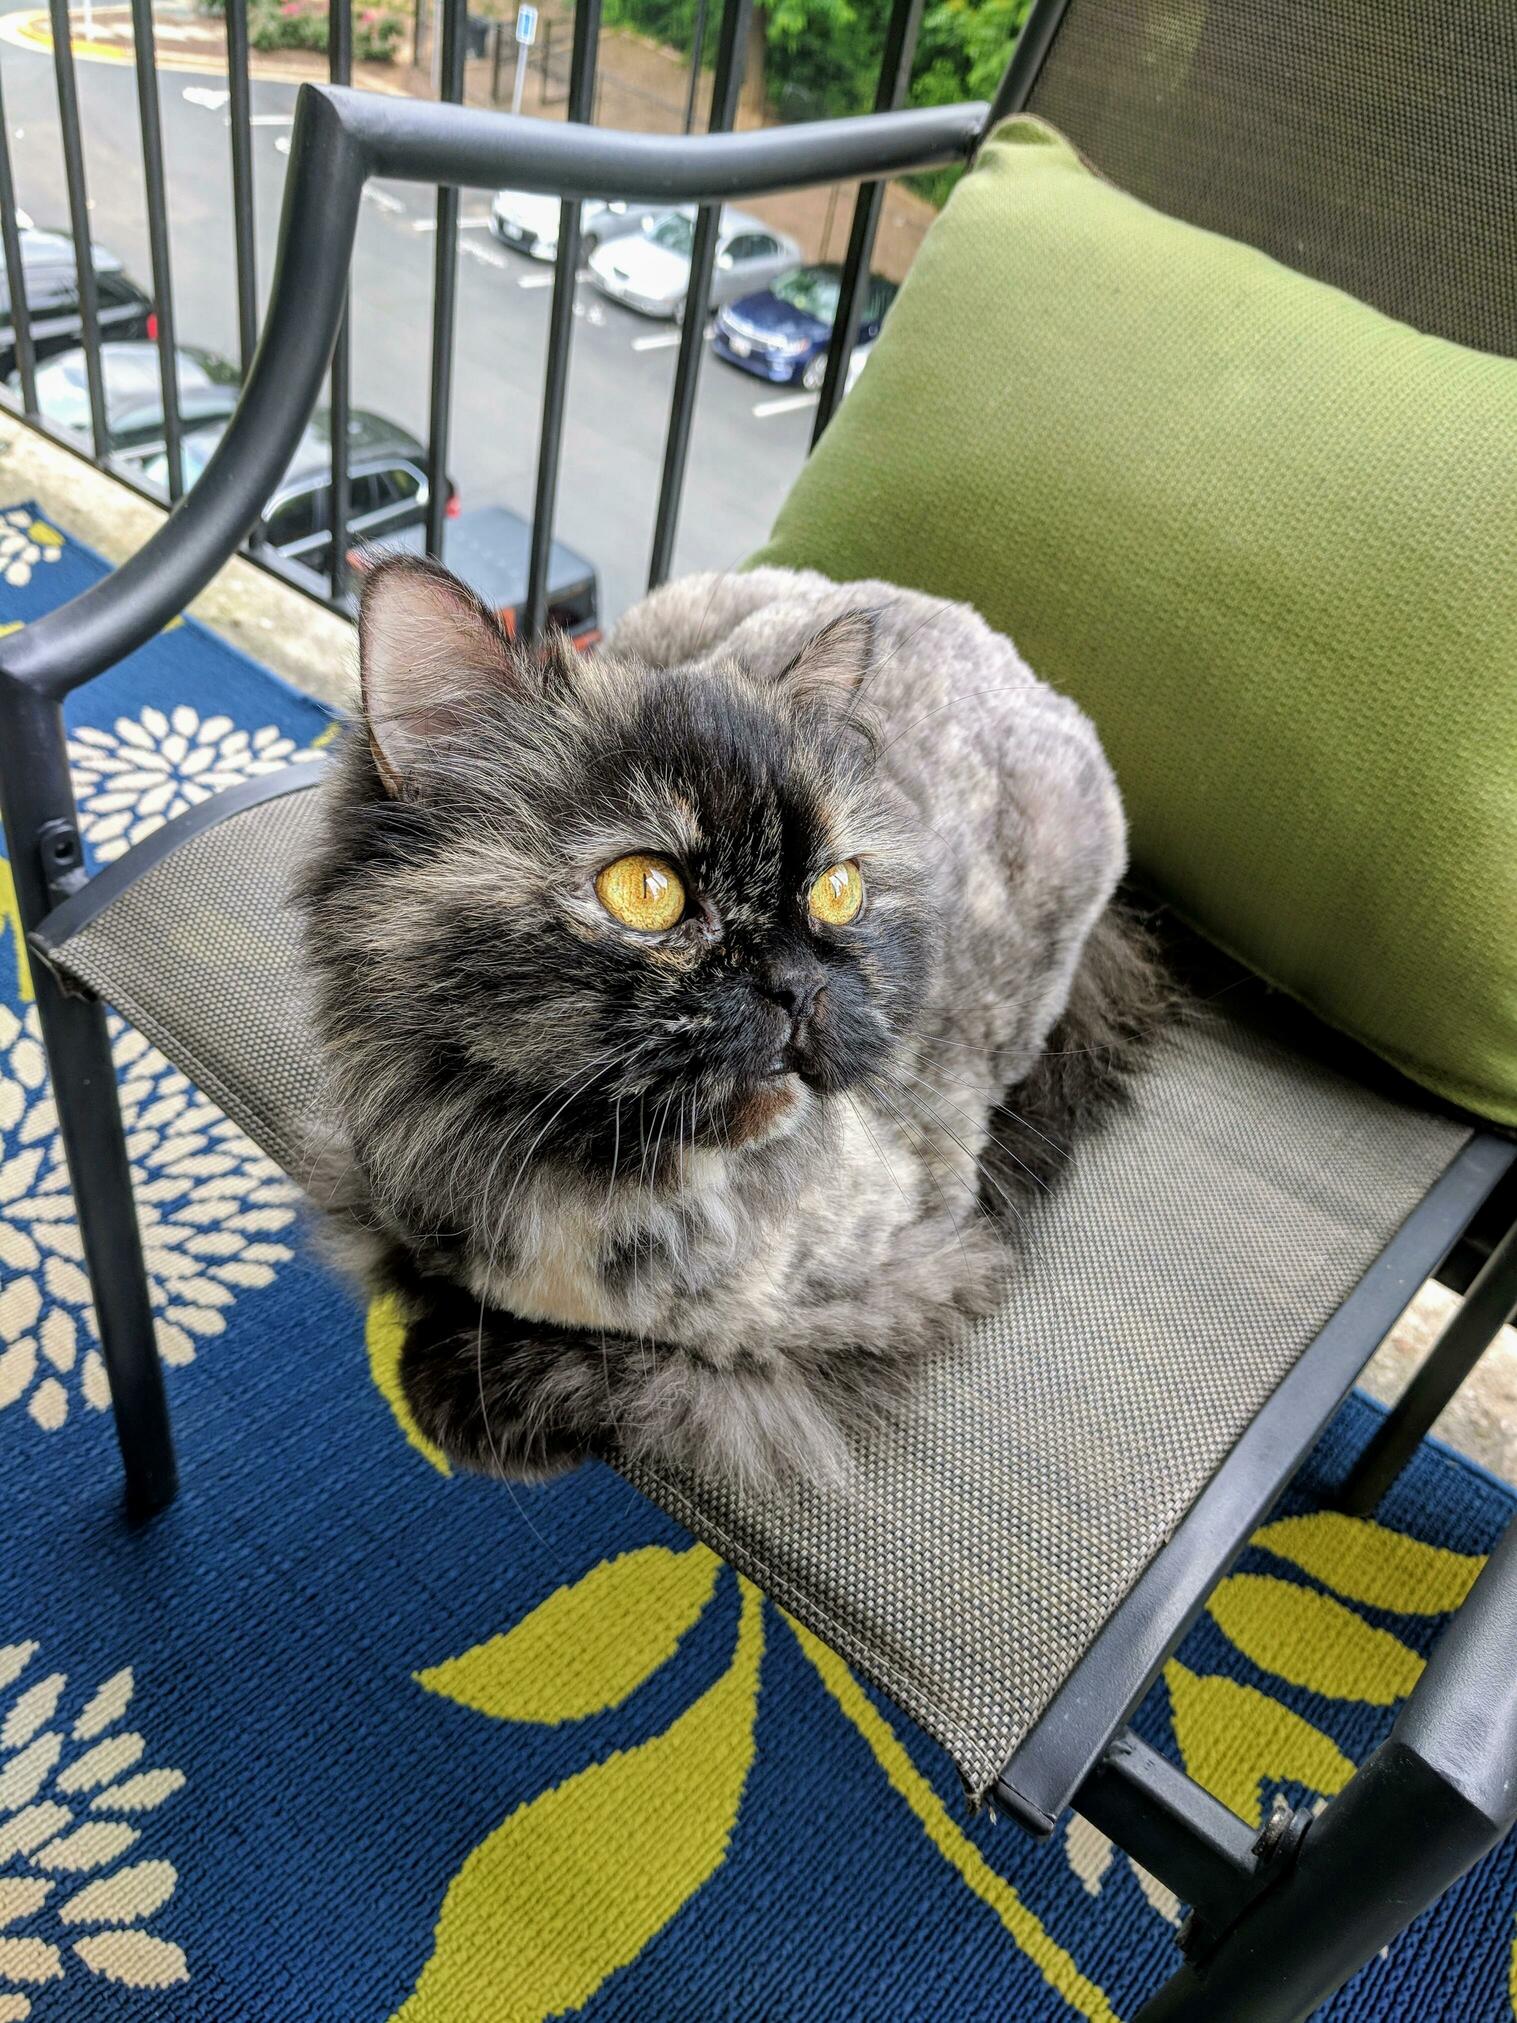 My pretty girl visa likes to sit with me on the patio